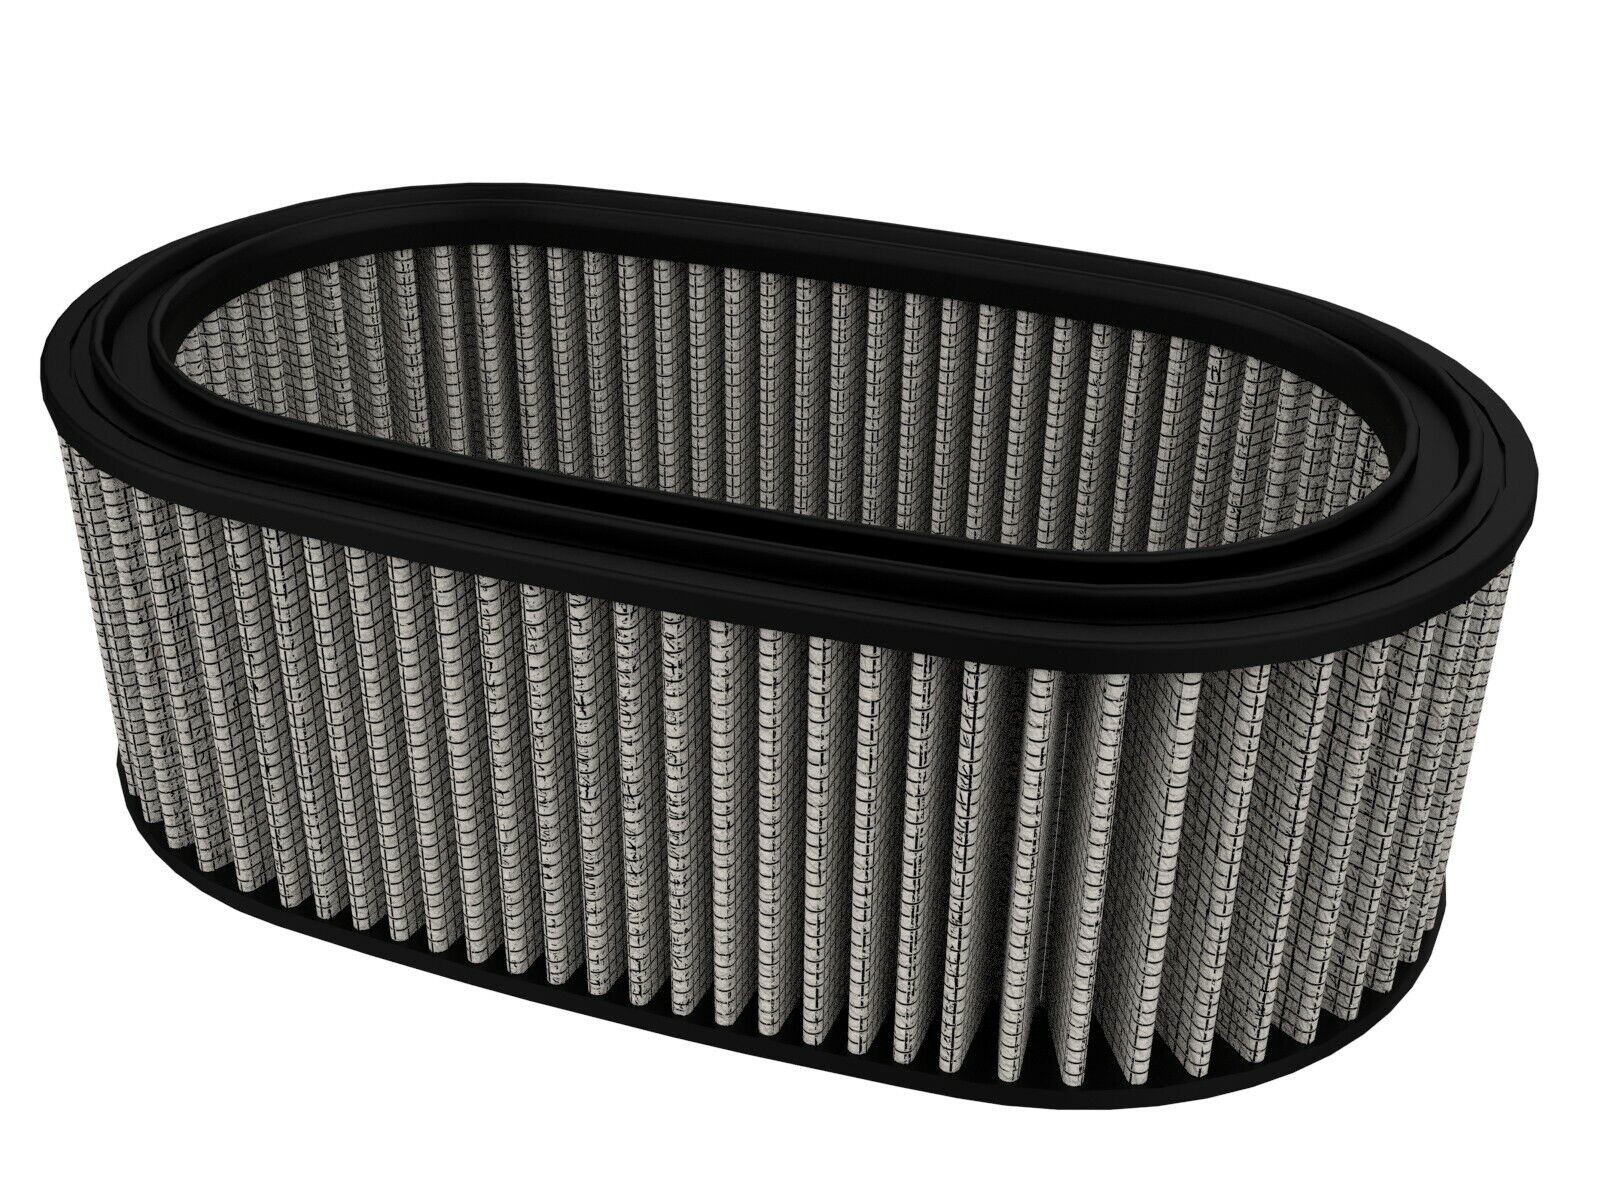 aFe Performance Dry Air Filter for C8 Corvette | 11-10148 | 2020 +